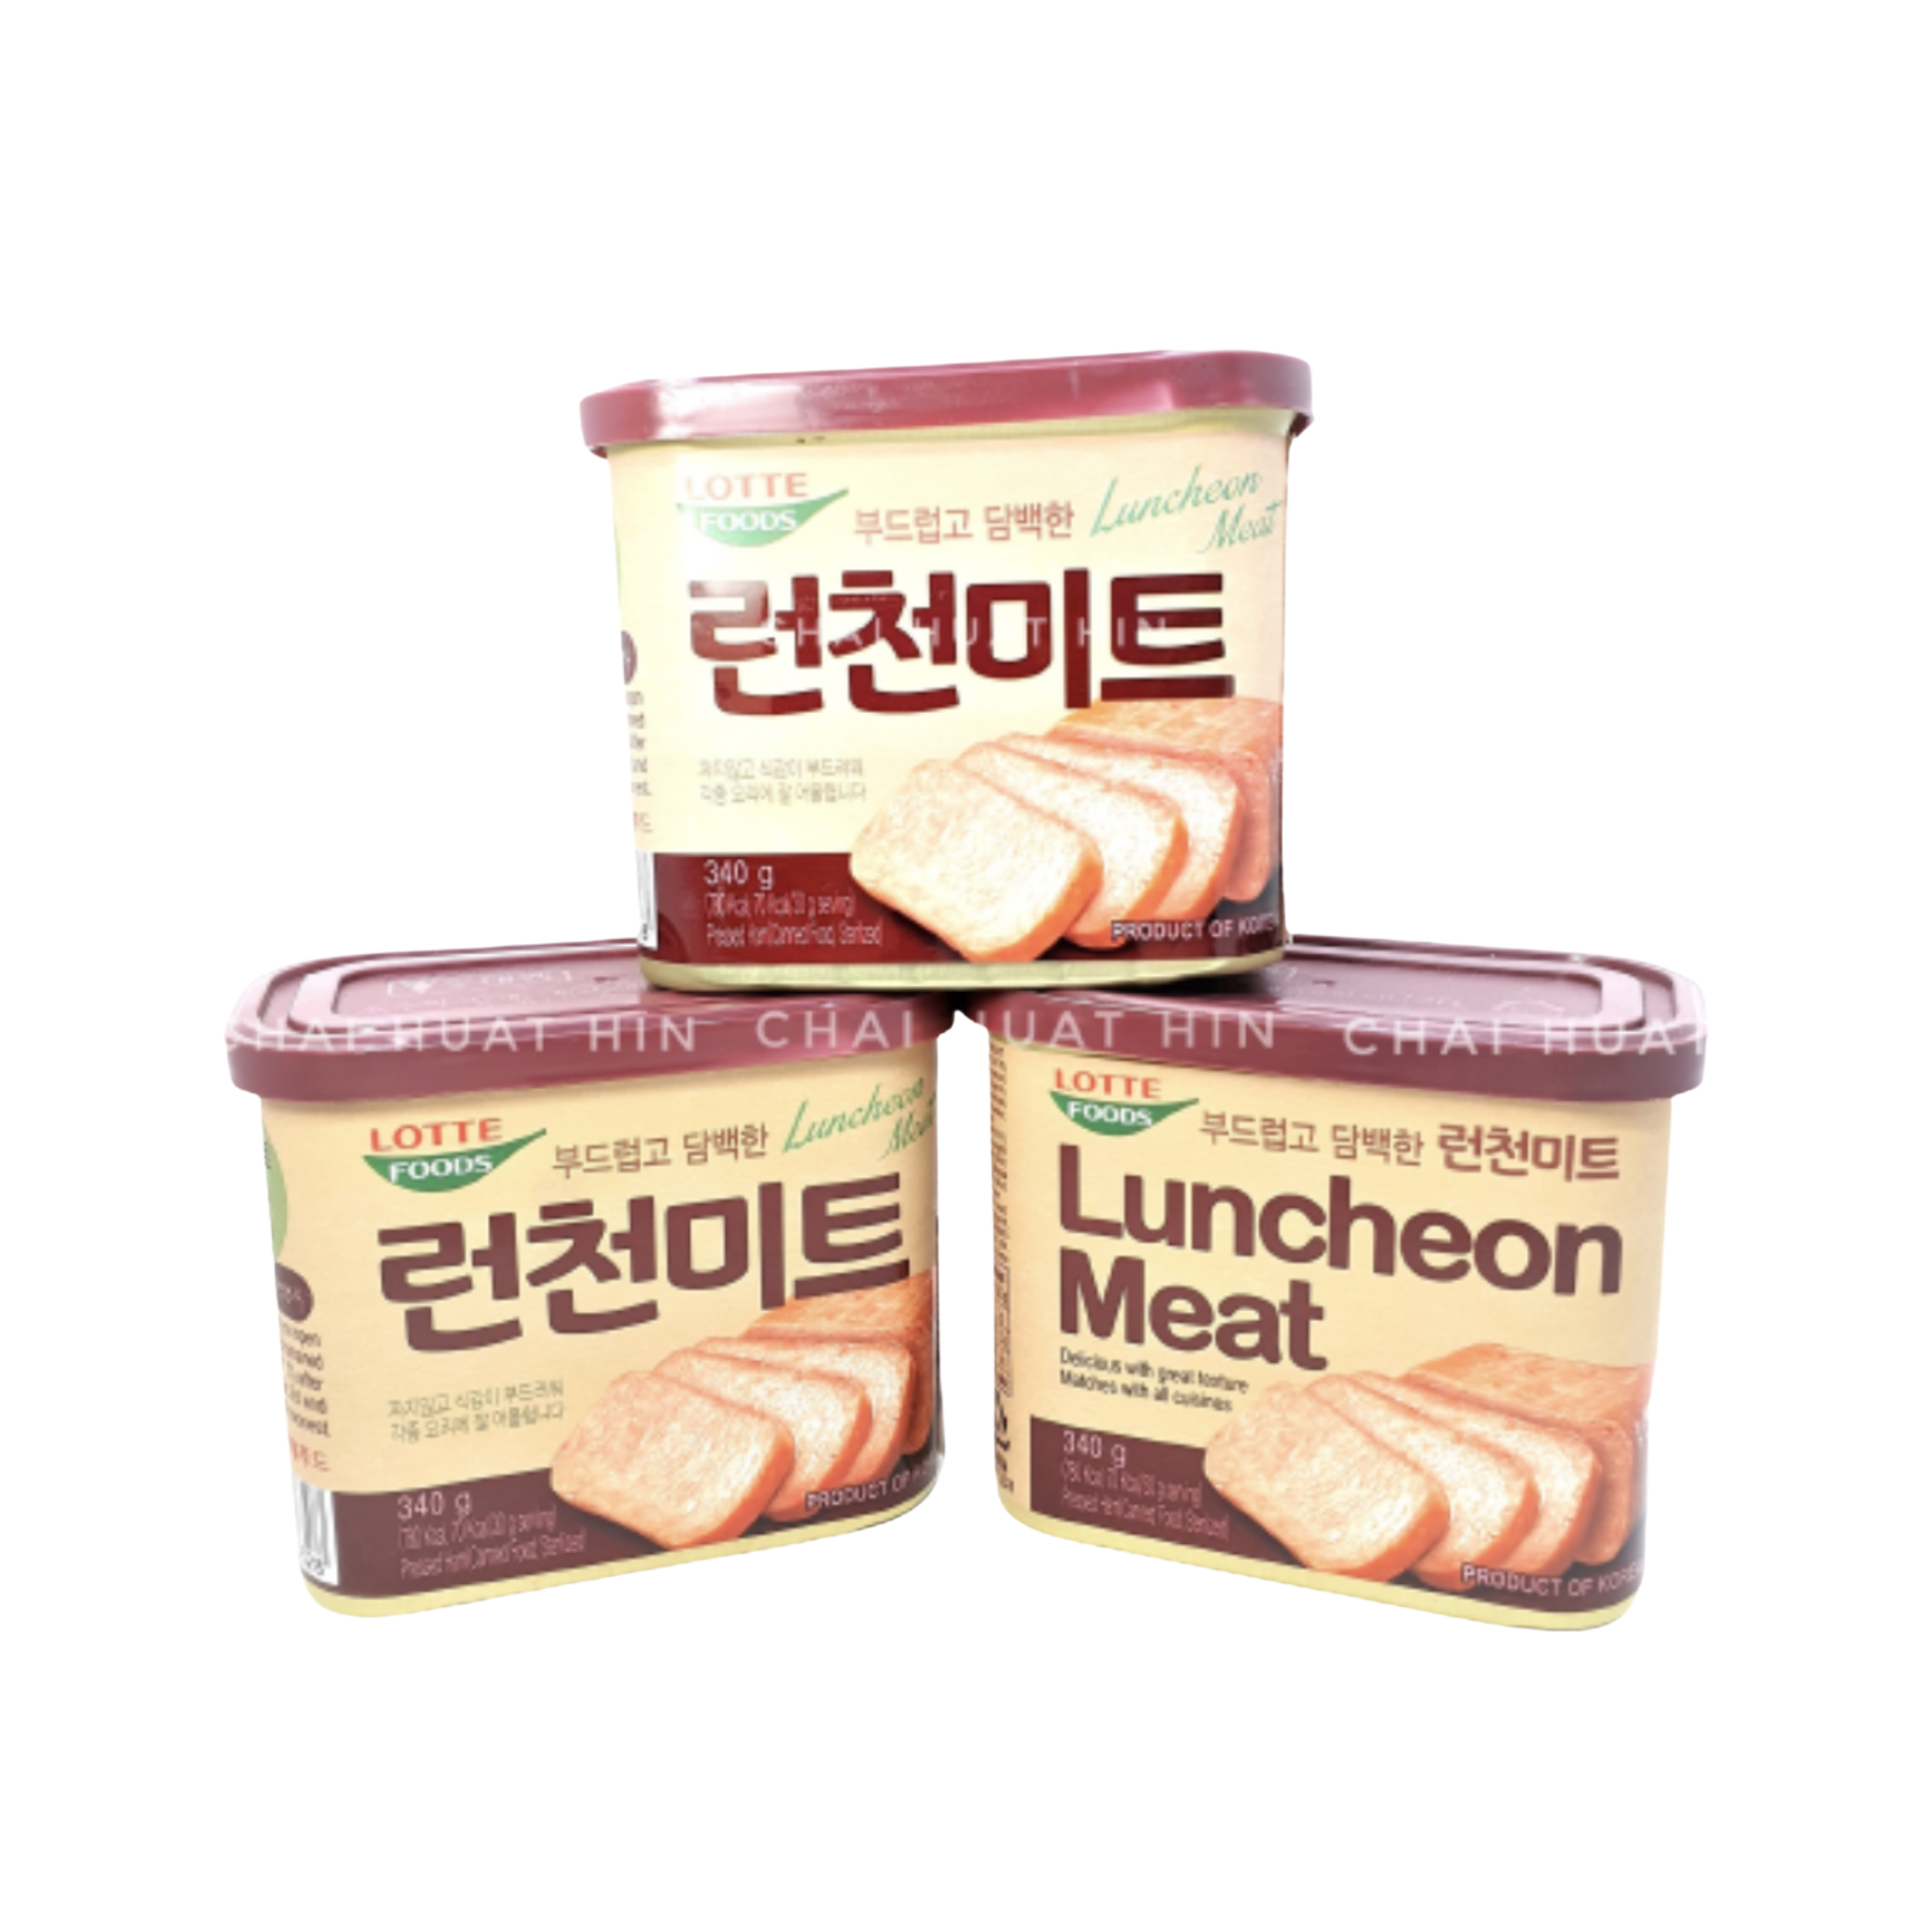 Lotte Luncheon Meat Promo Set [3 can]